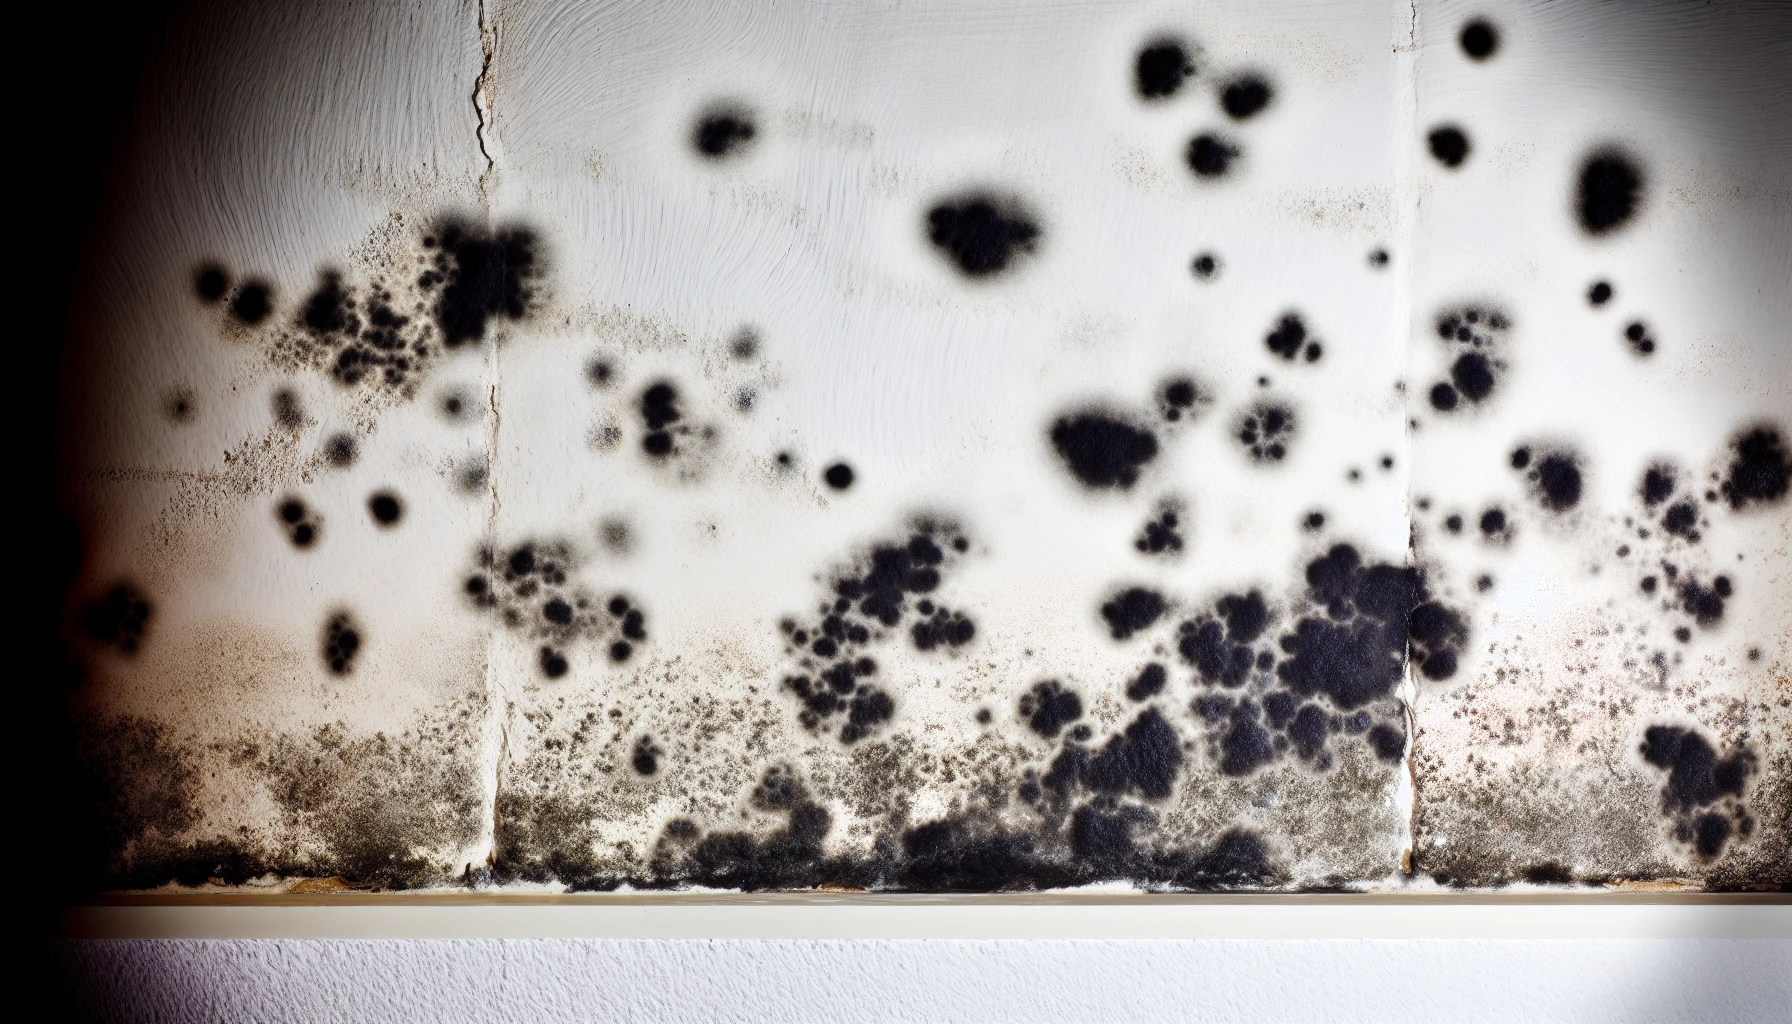 Mold growth in a residential property